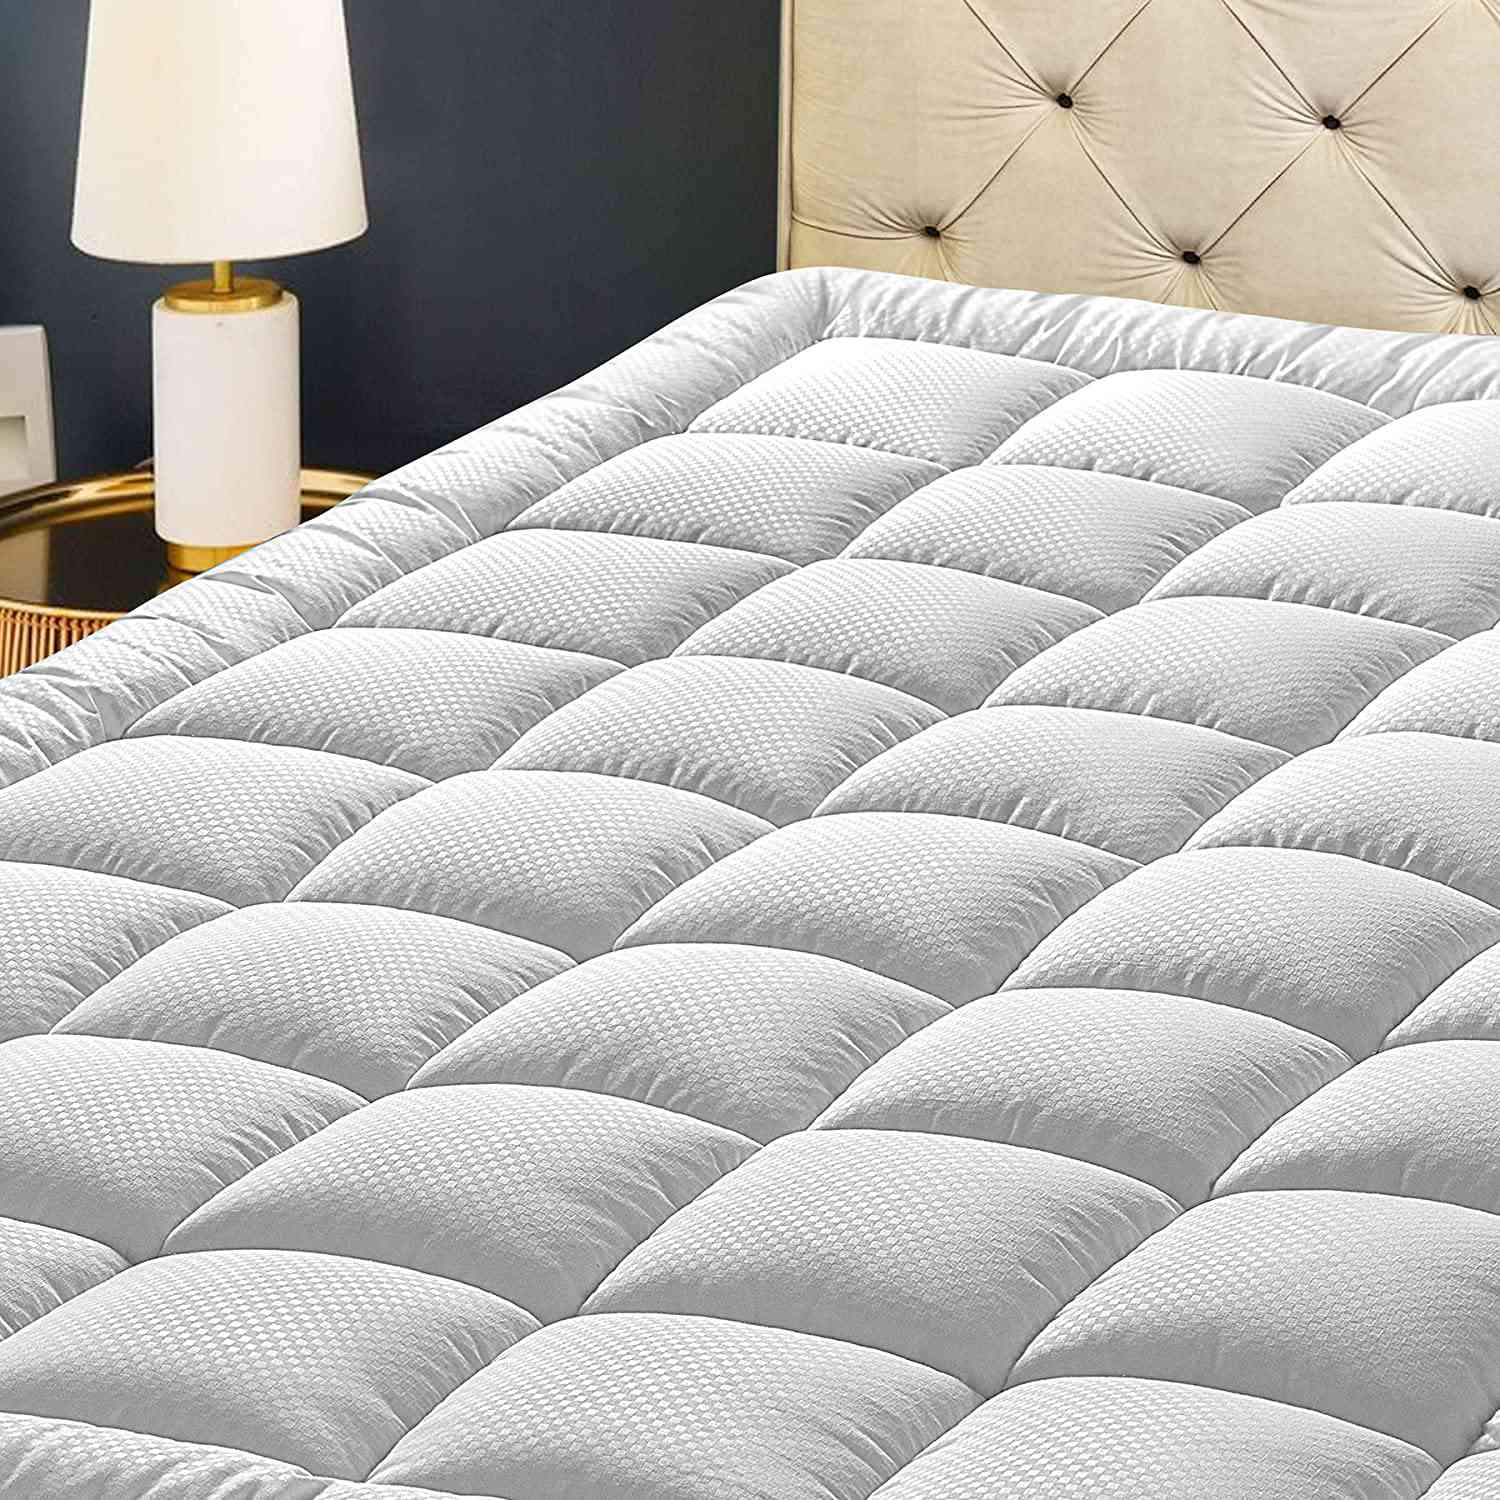 Thick Queen Size Mattress Pad Cover Pillow Top Topper Padded Luxury Bed Cooling 